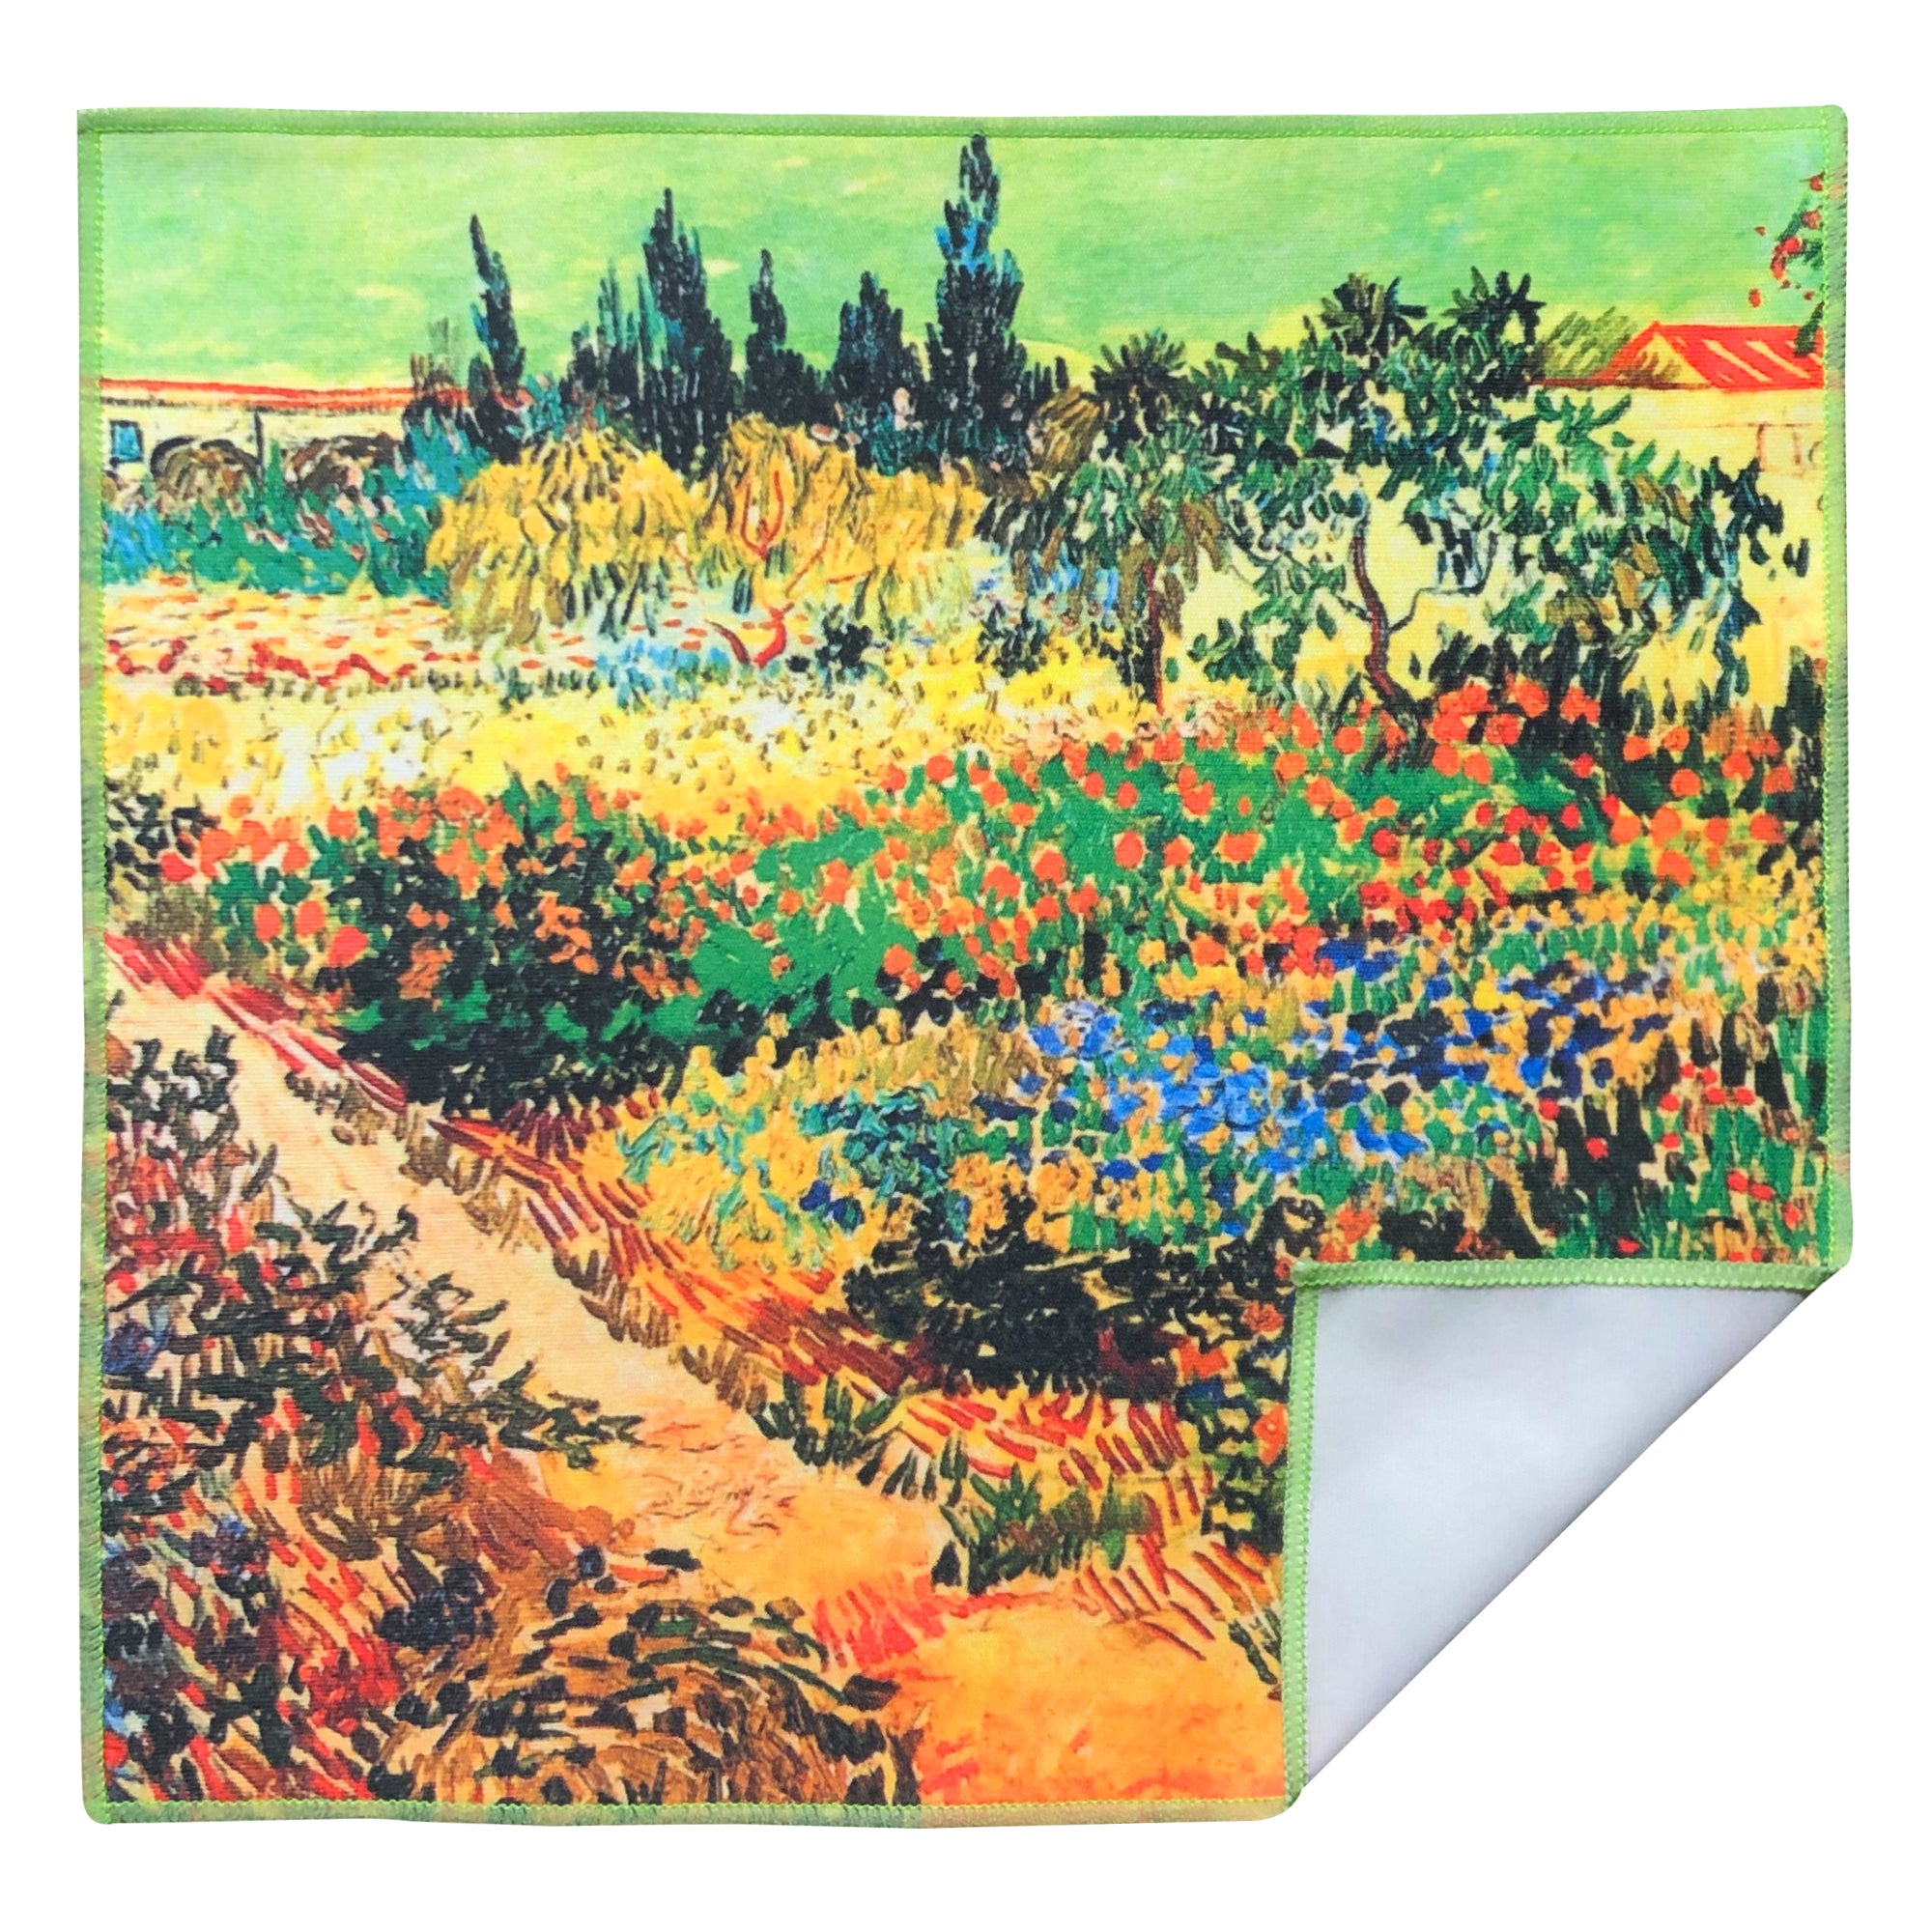 [6 Pack] Vincent Van Gogh "The Garden at Arles" - Art Collection - Ultra Premium Quality Microfiber Cleaning Cloths